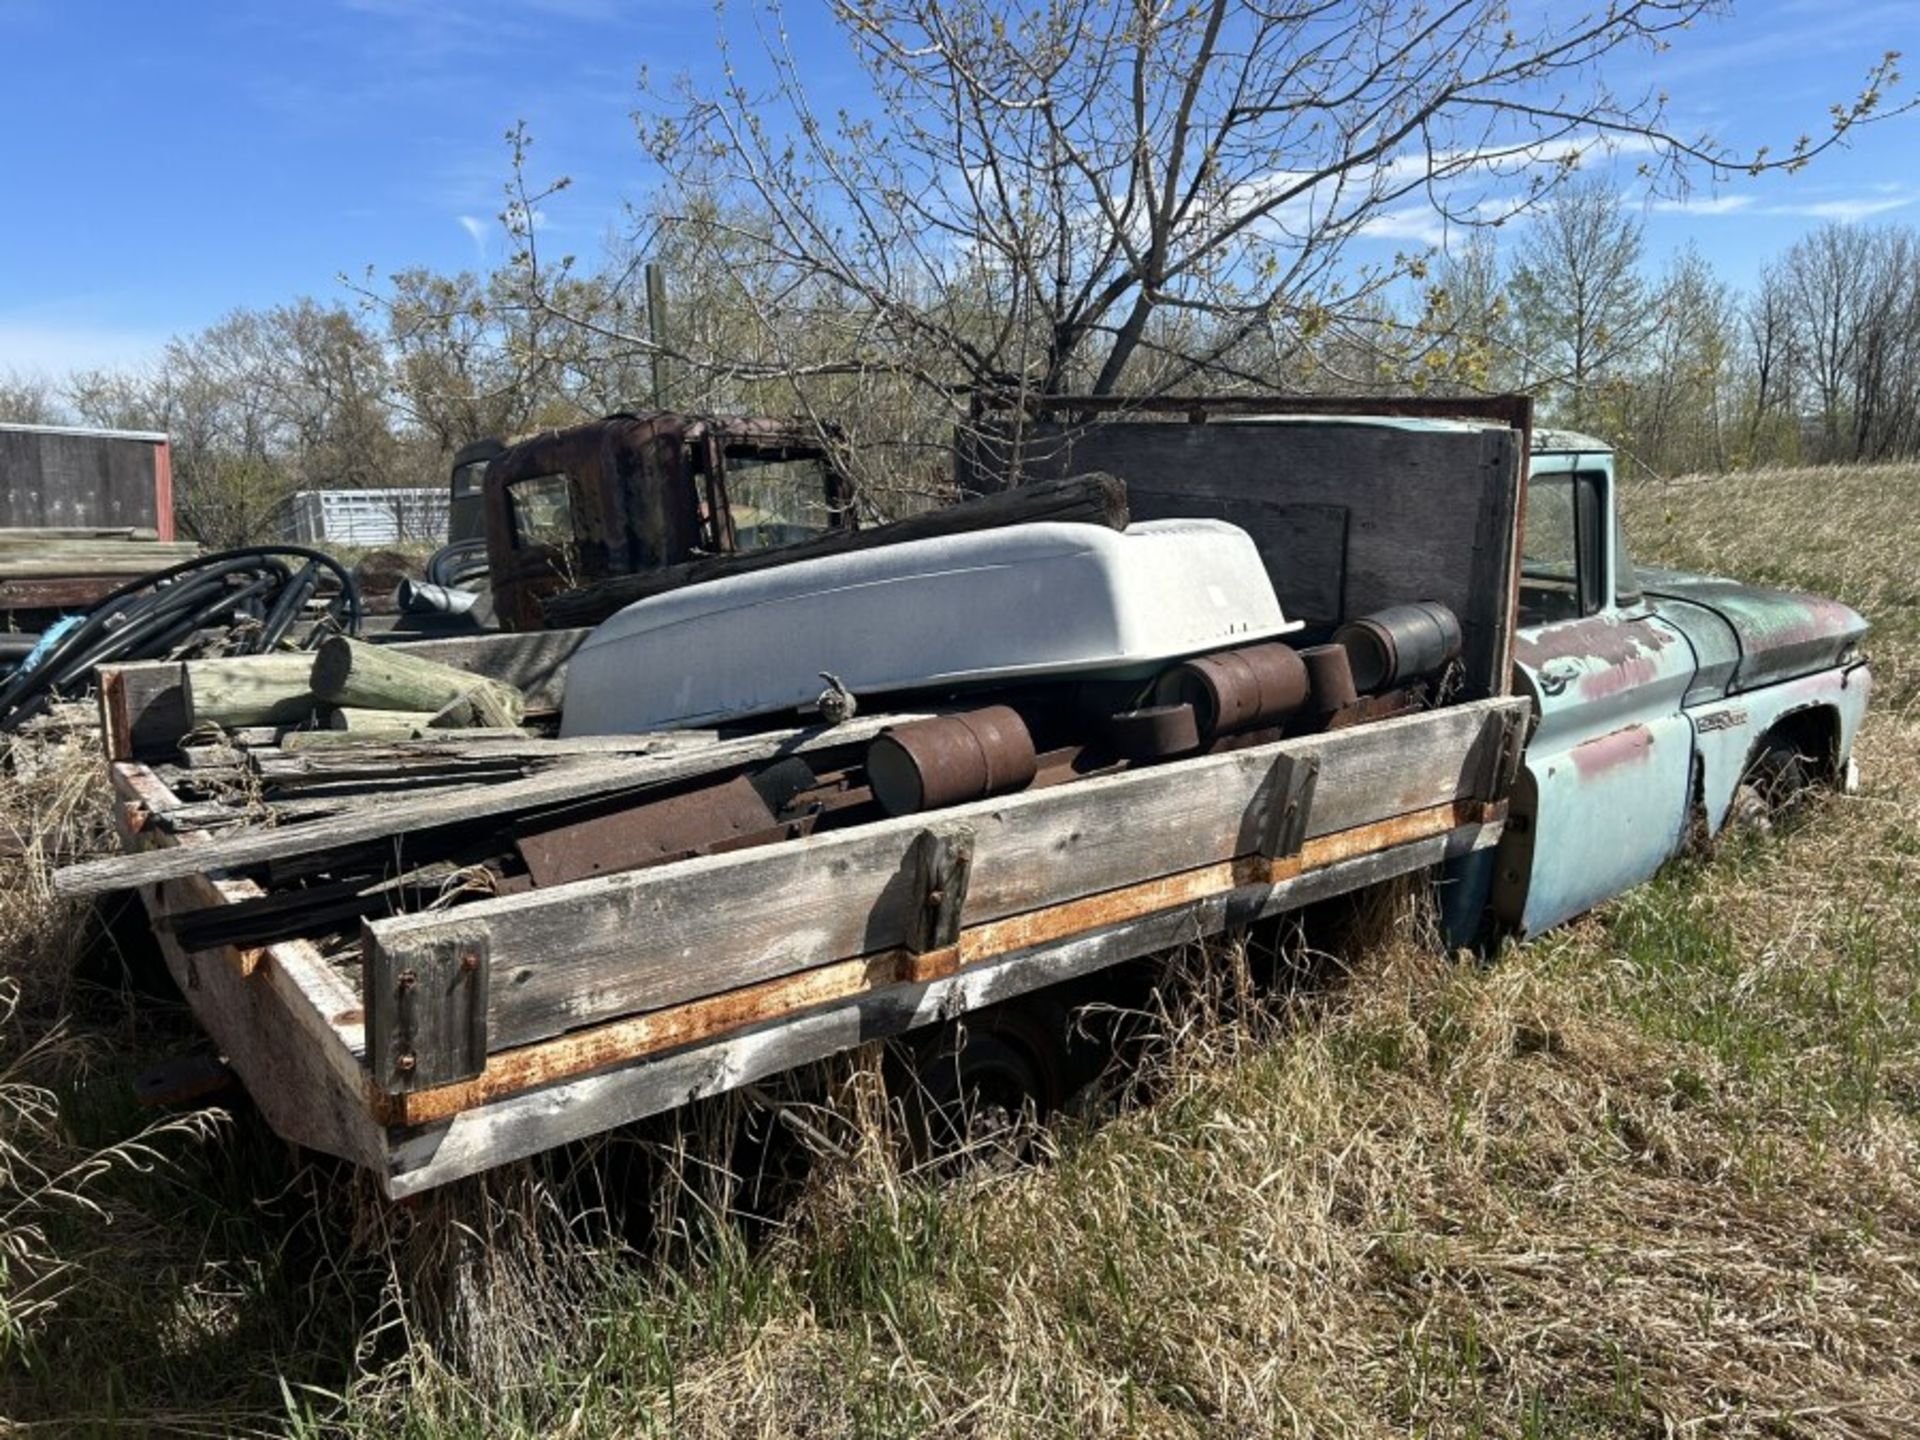 1968 CHEV 930 TRUCK (PROJECT) - LOCATED 22 KM EAST OF PONOKA - Image 3 of 5